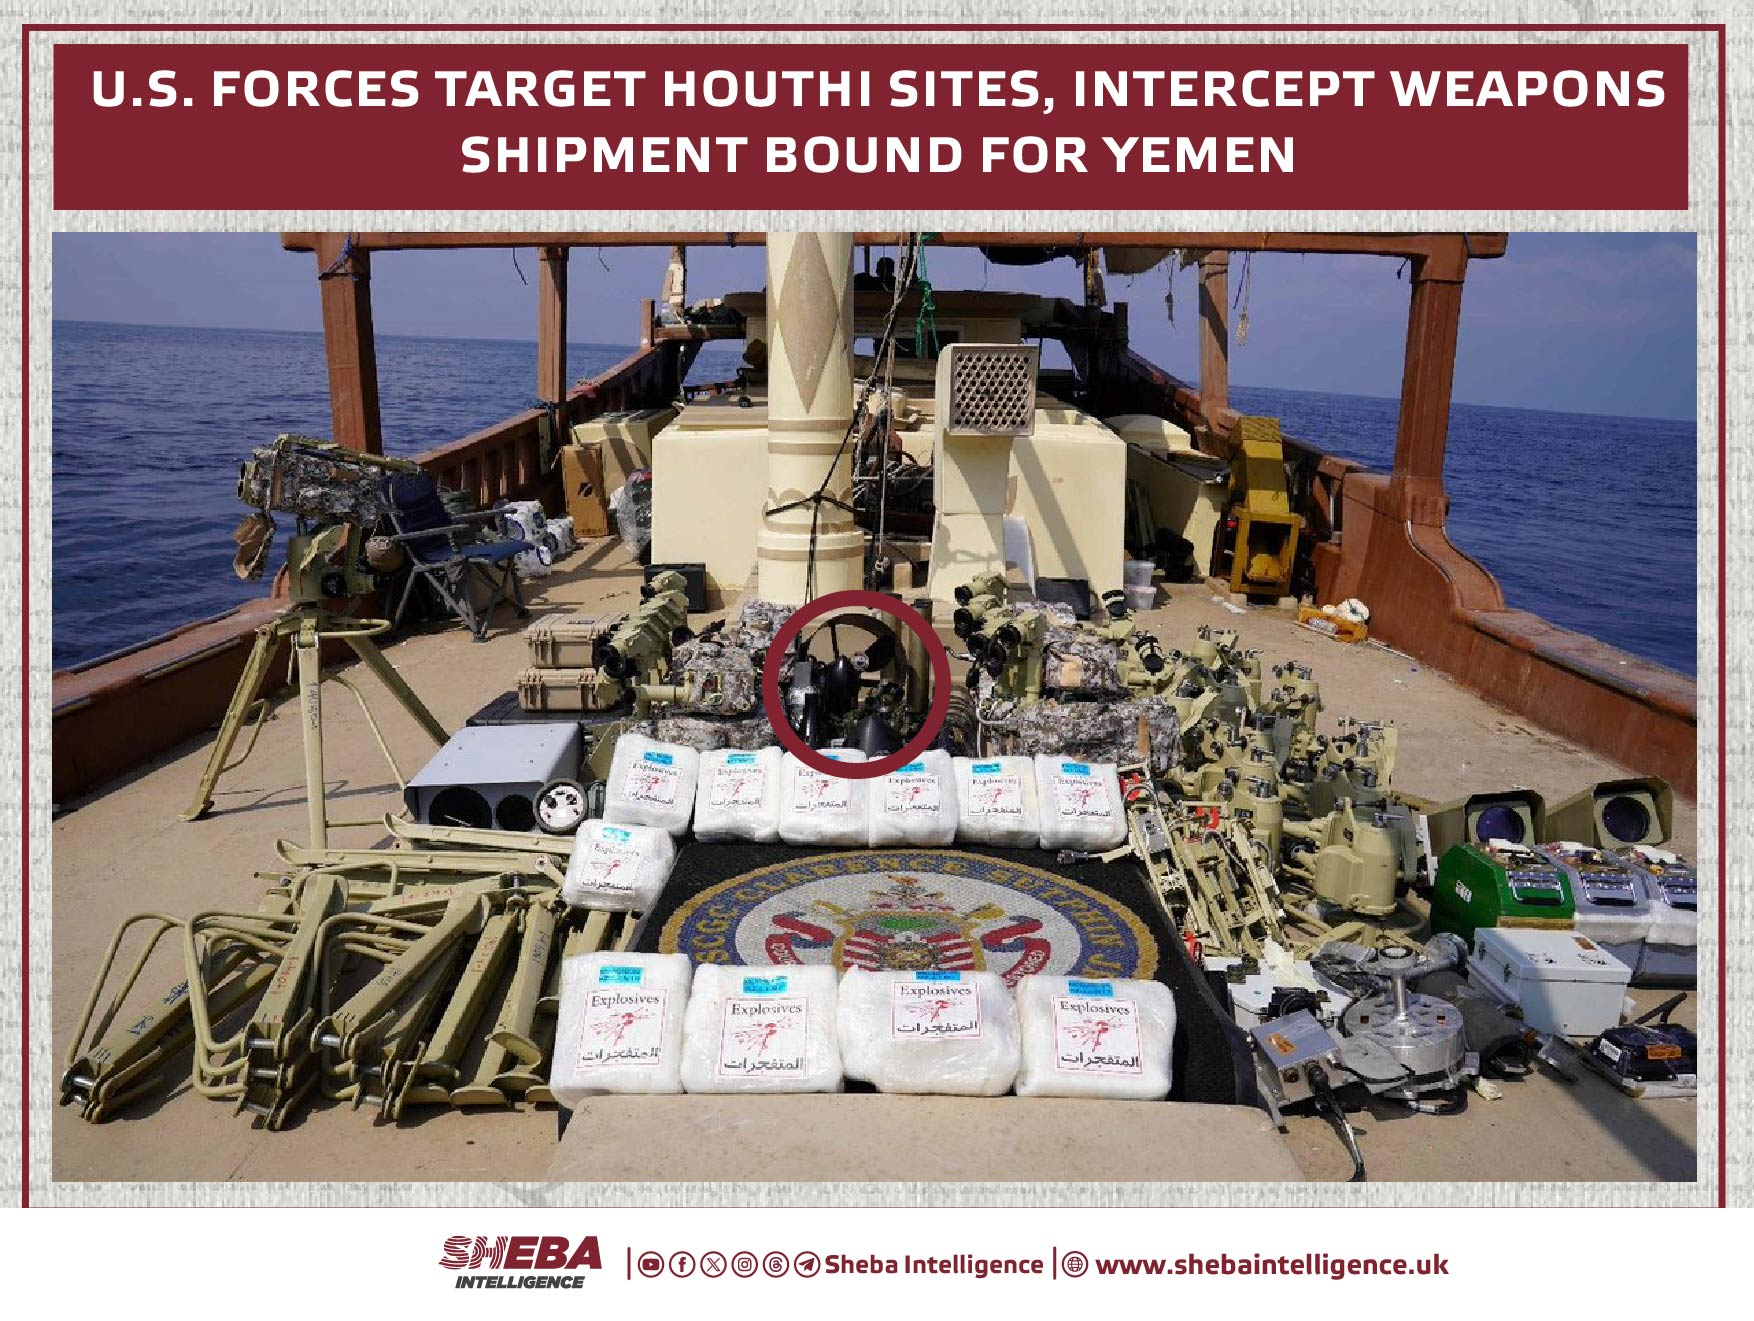 U.S. Forces Target Houthi Sites, Intercept Weapons Shipment Bound for Yemen